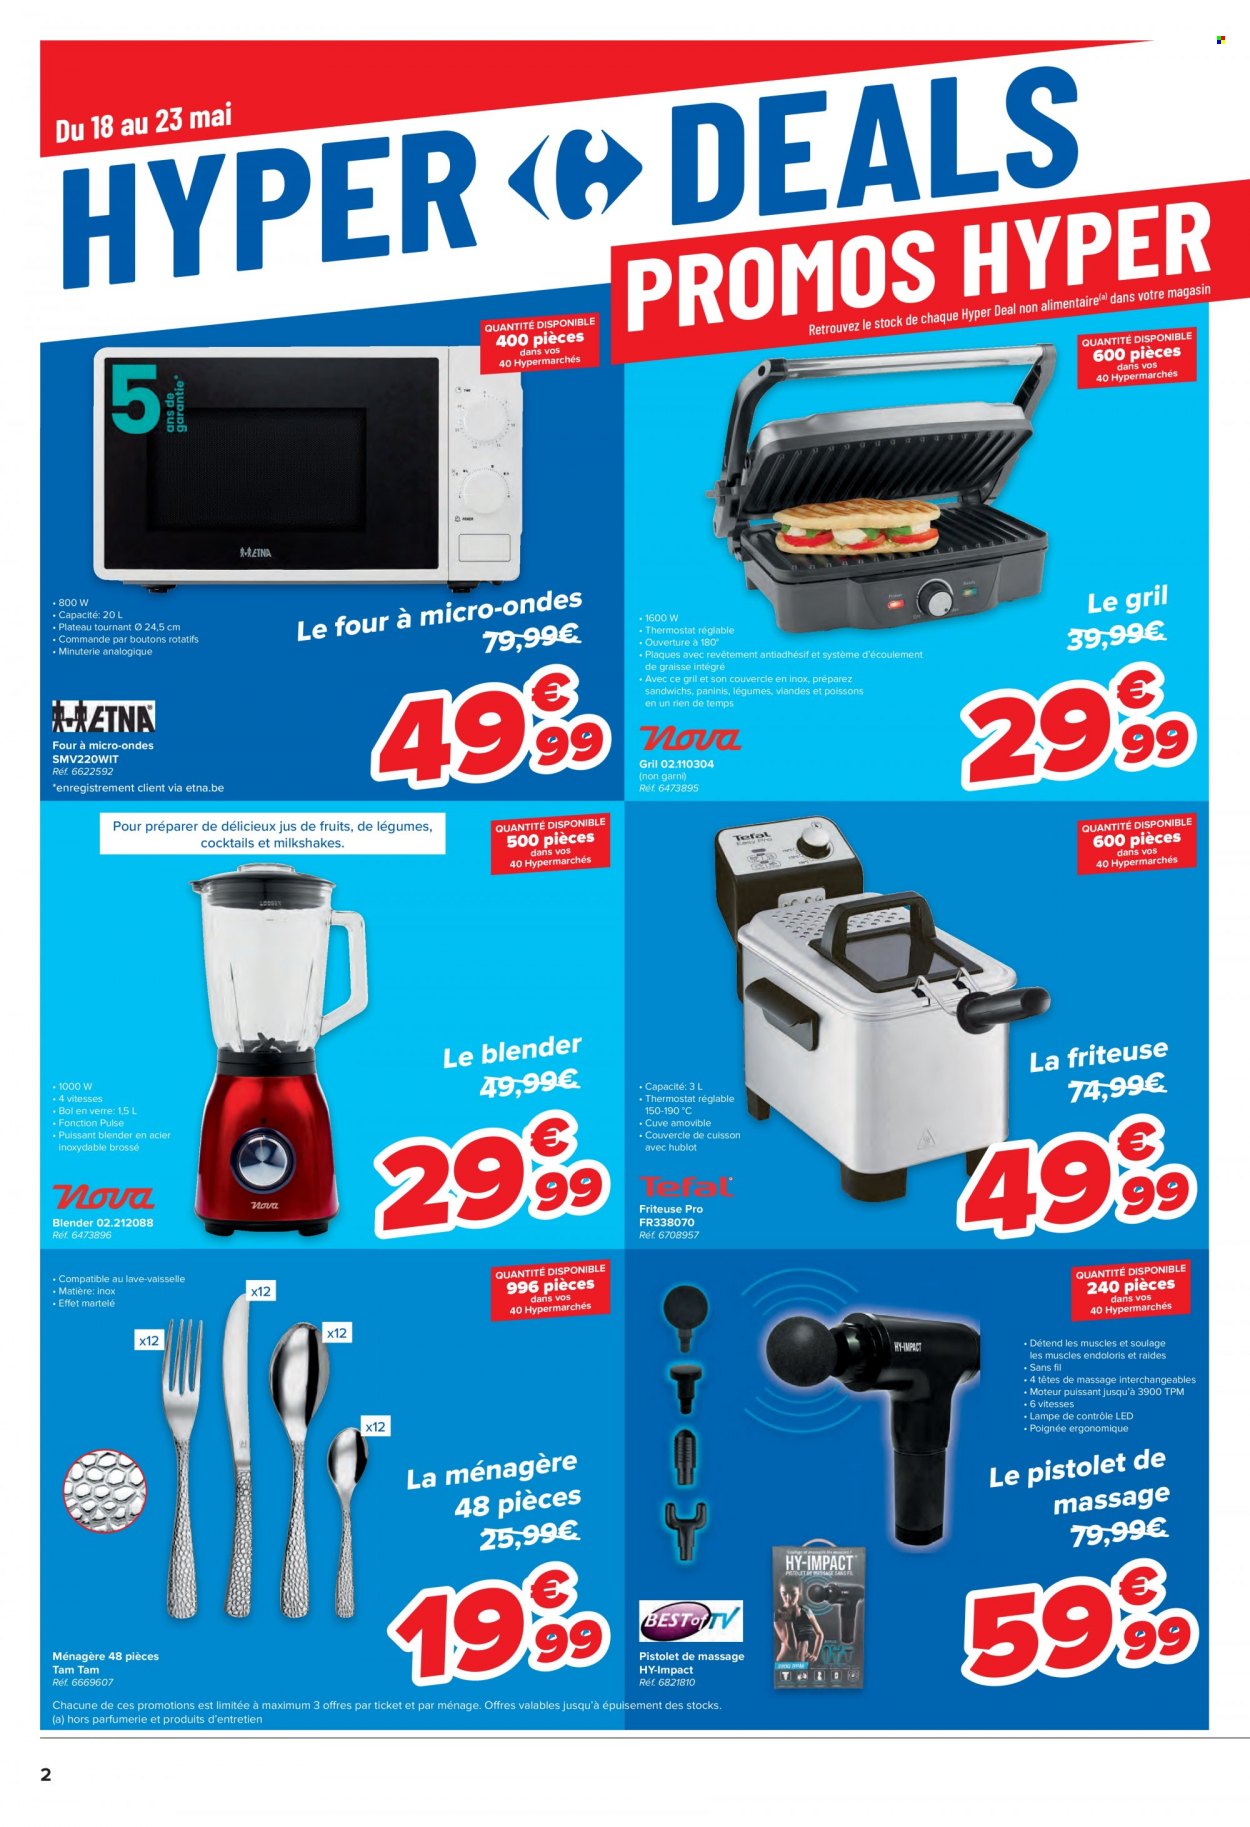 Catalogue Carrefour hypermarkt - 18.5.2022 - 23.5.2022. Page 2.